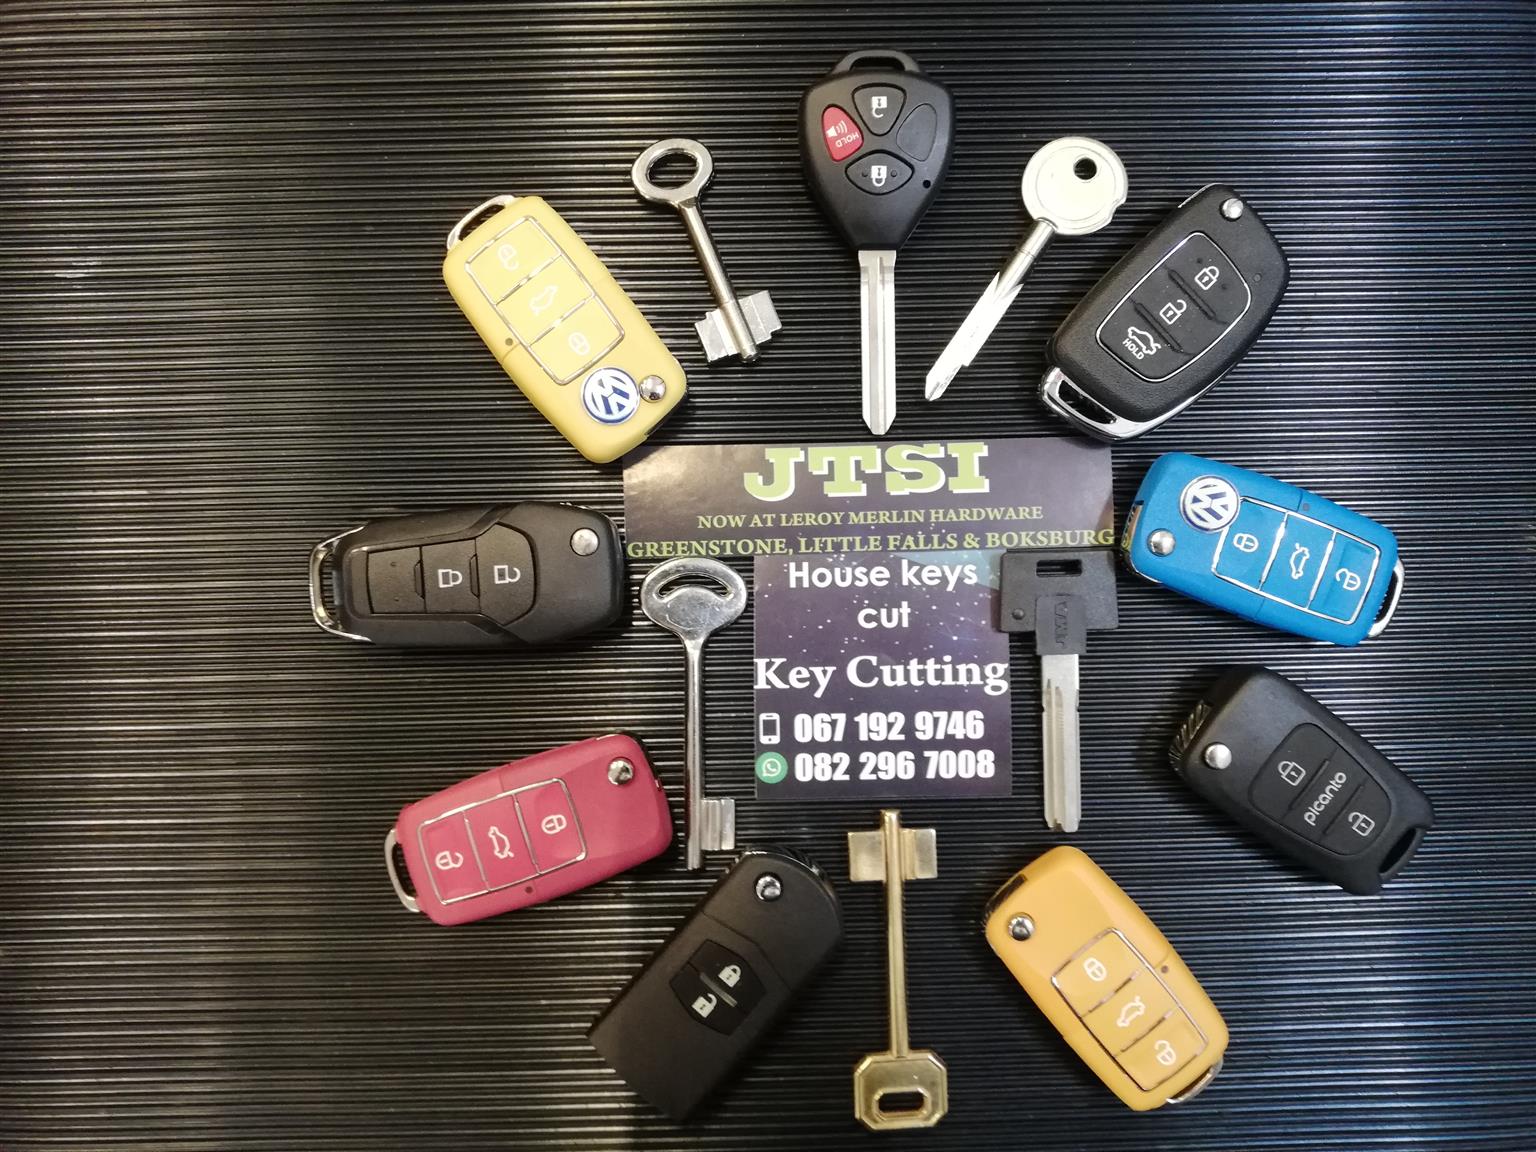 Spare keys and caseings for cars